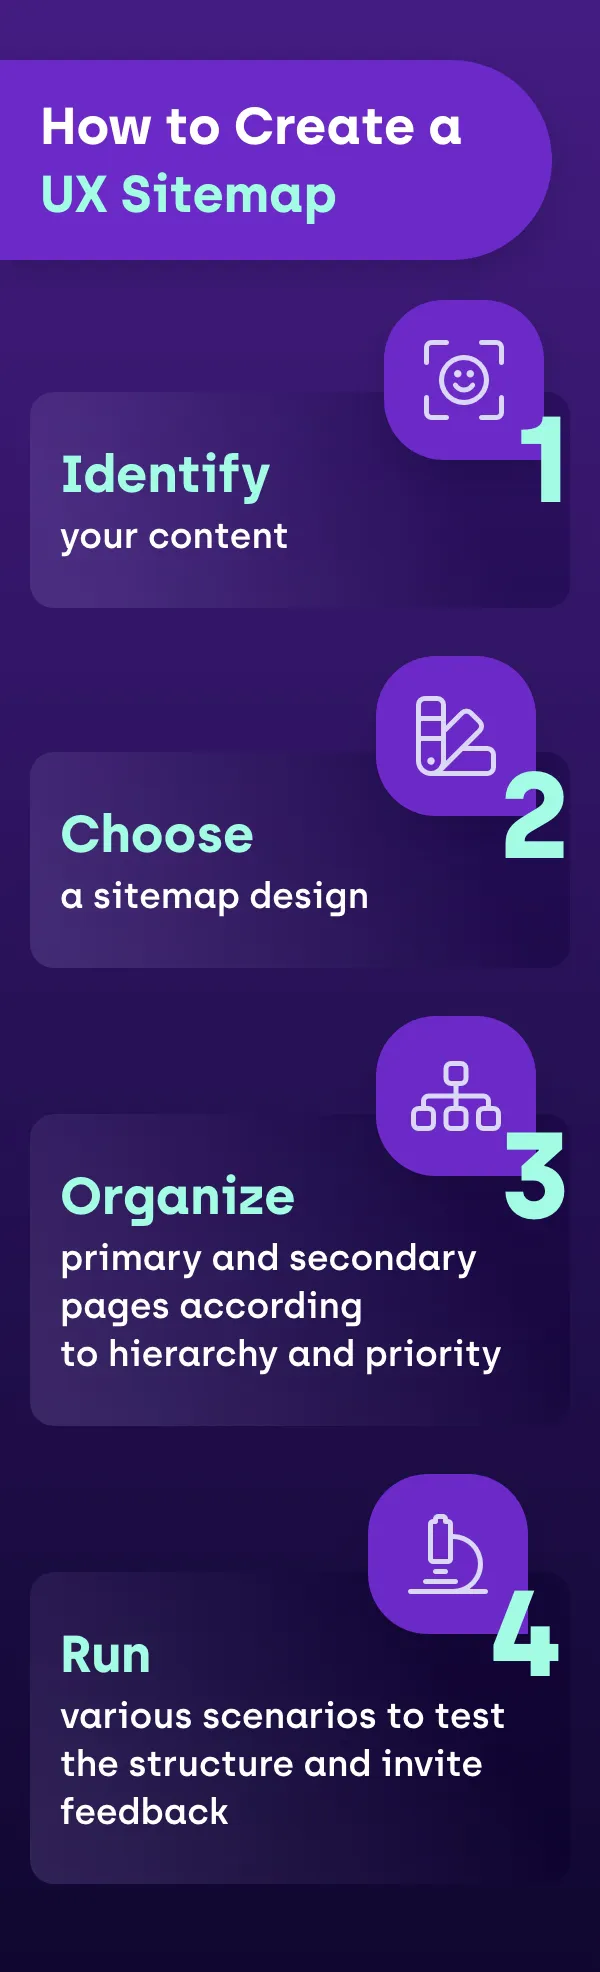 What is a UX sitemap, and how to create it?